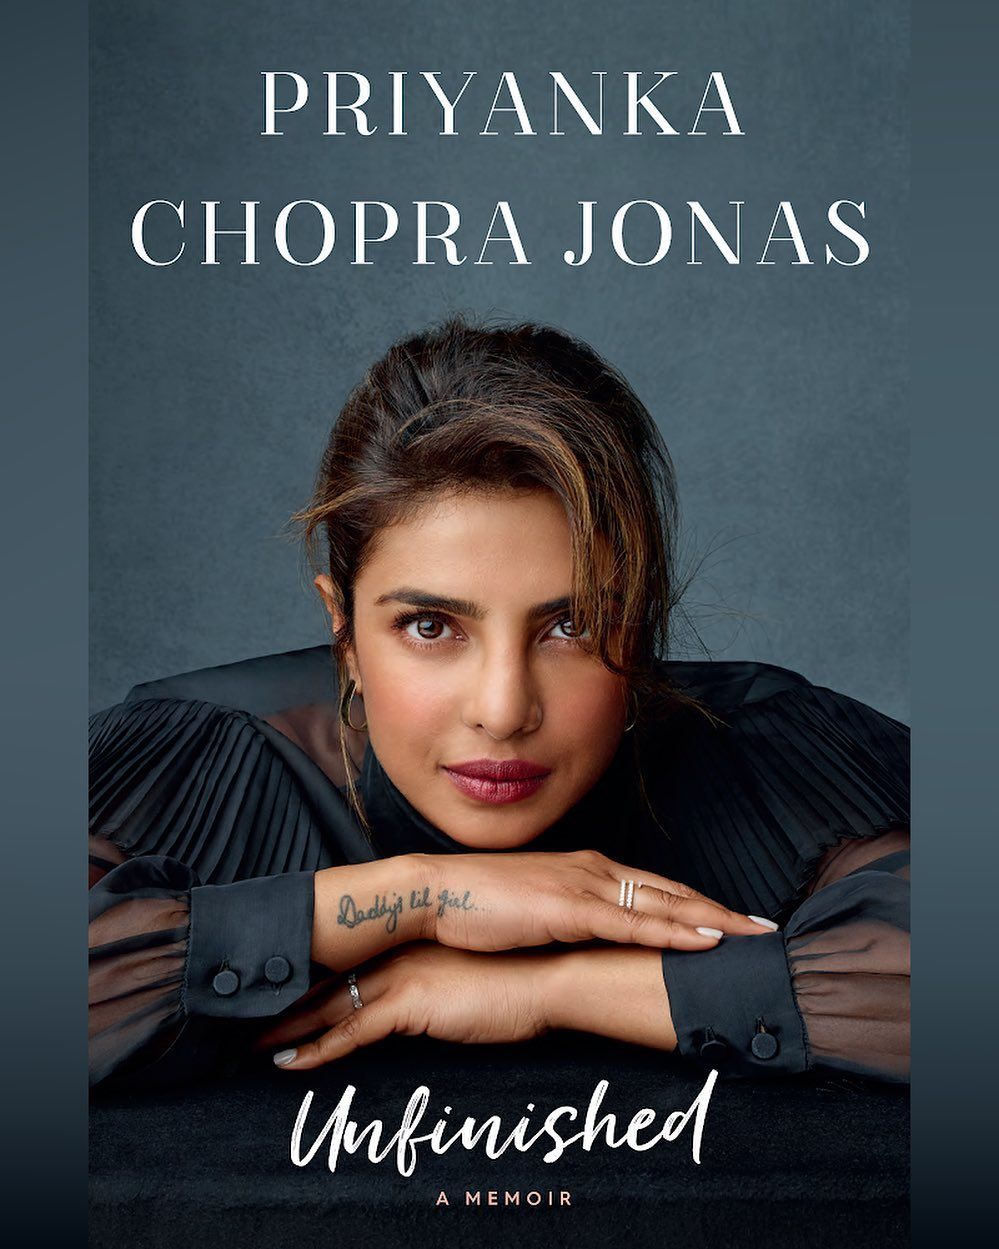 Priyanka Chopra's Long Awaited Memoir 'Unfinished' To Finally Hit The Stands In February 